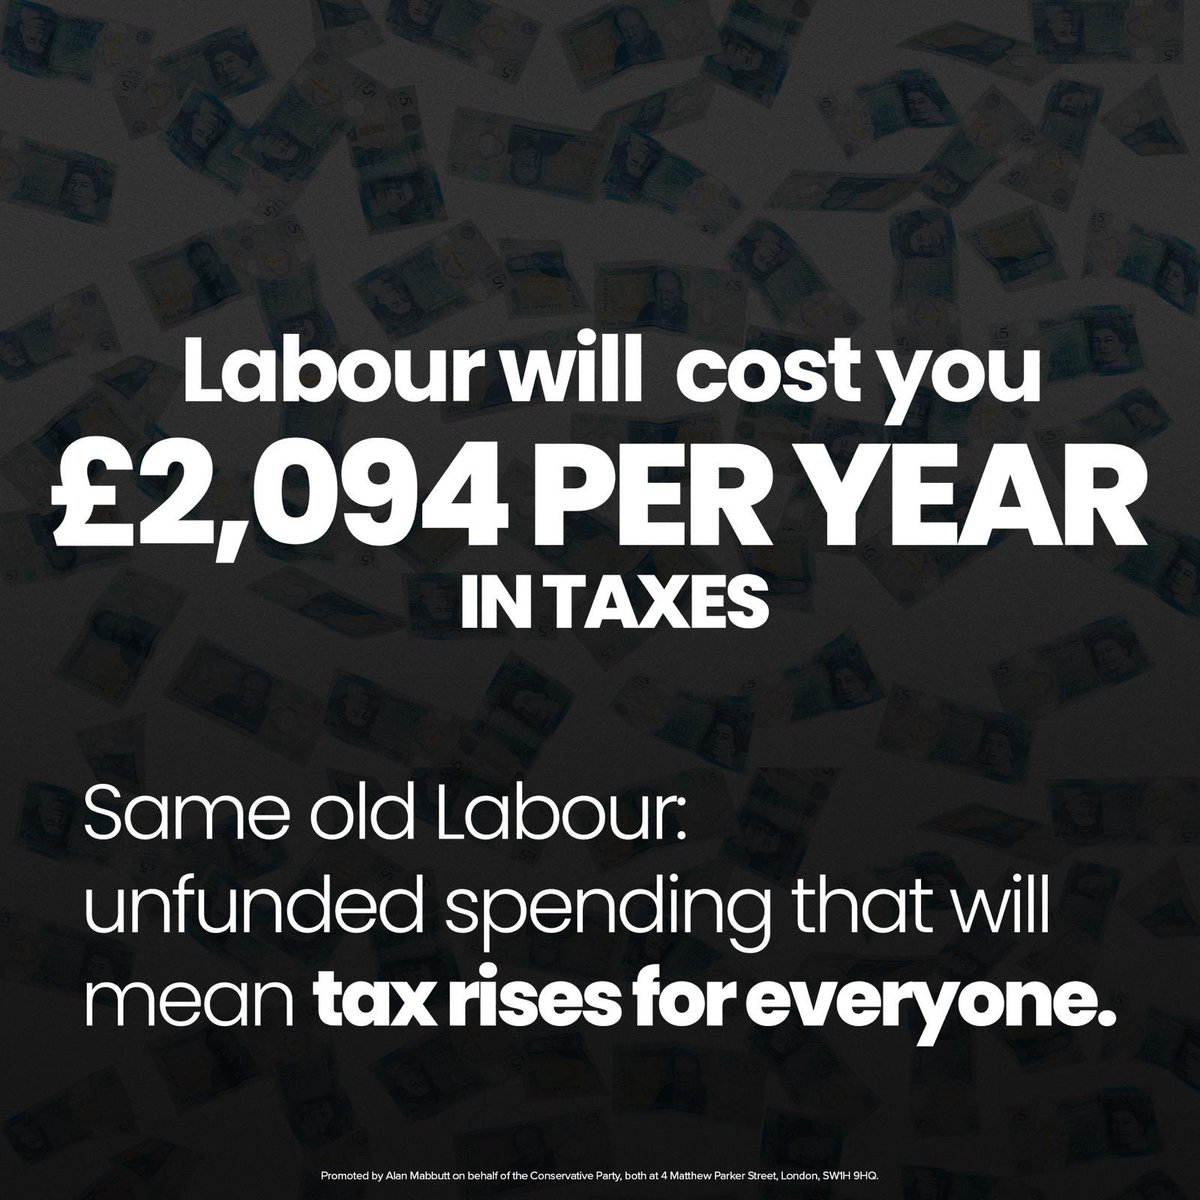 This is the reality of any Labour government, as history shows us. Taxes going up, hitting you in the pocket - as the official analysis by the Treasury today shows.